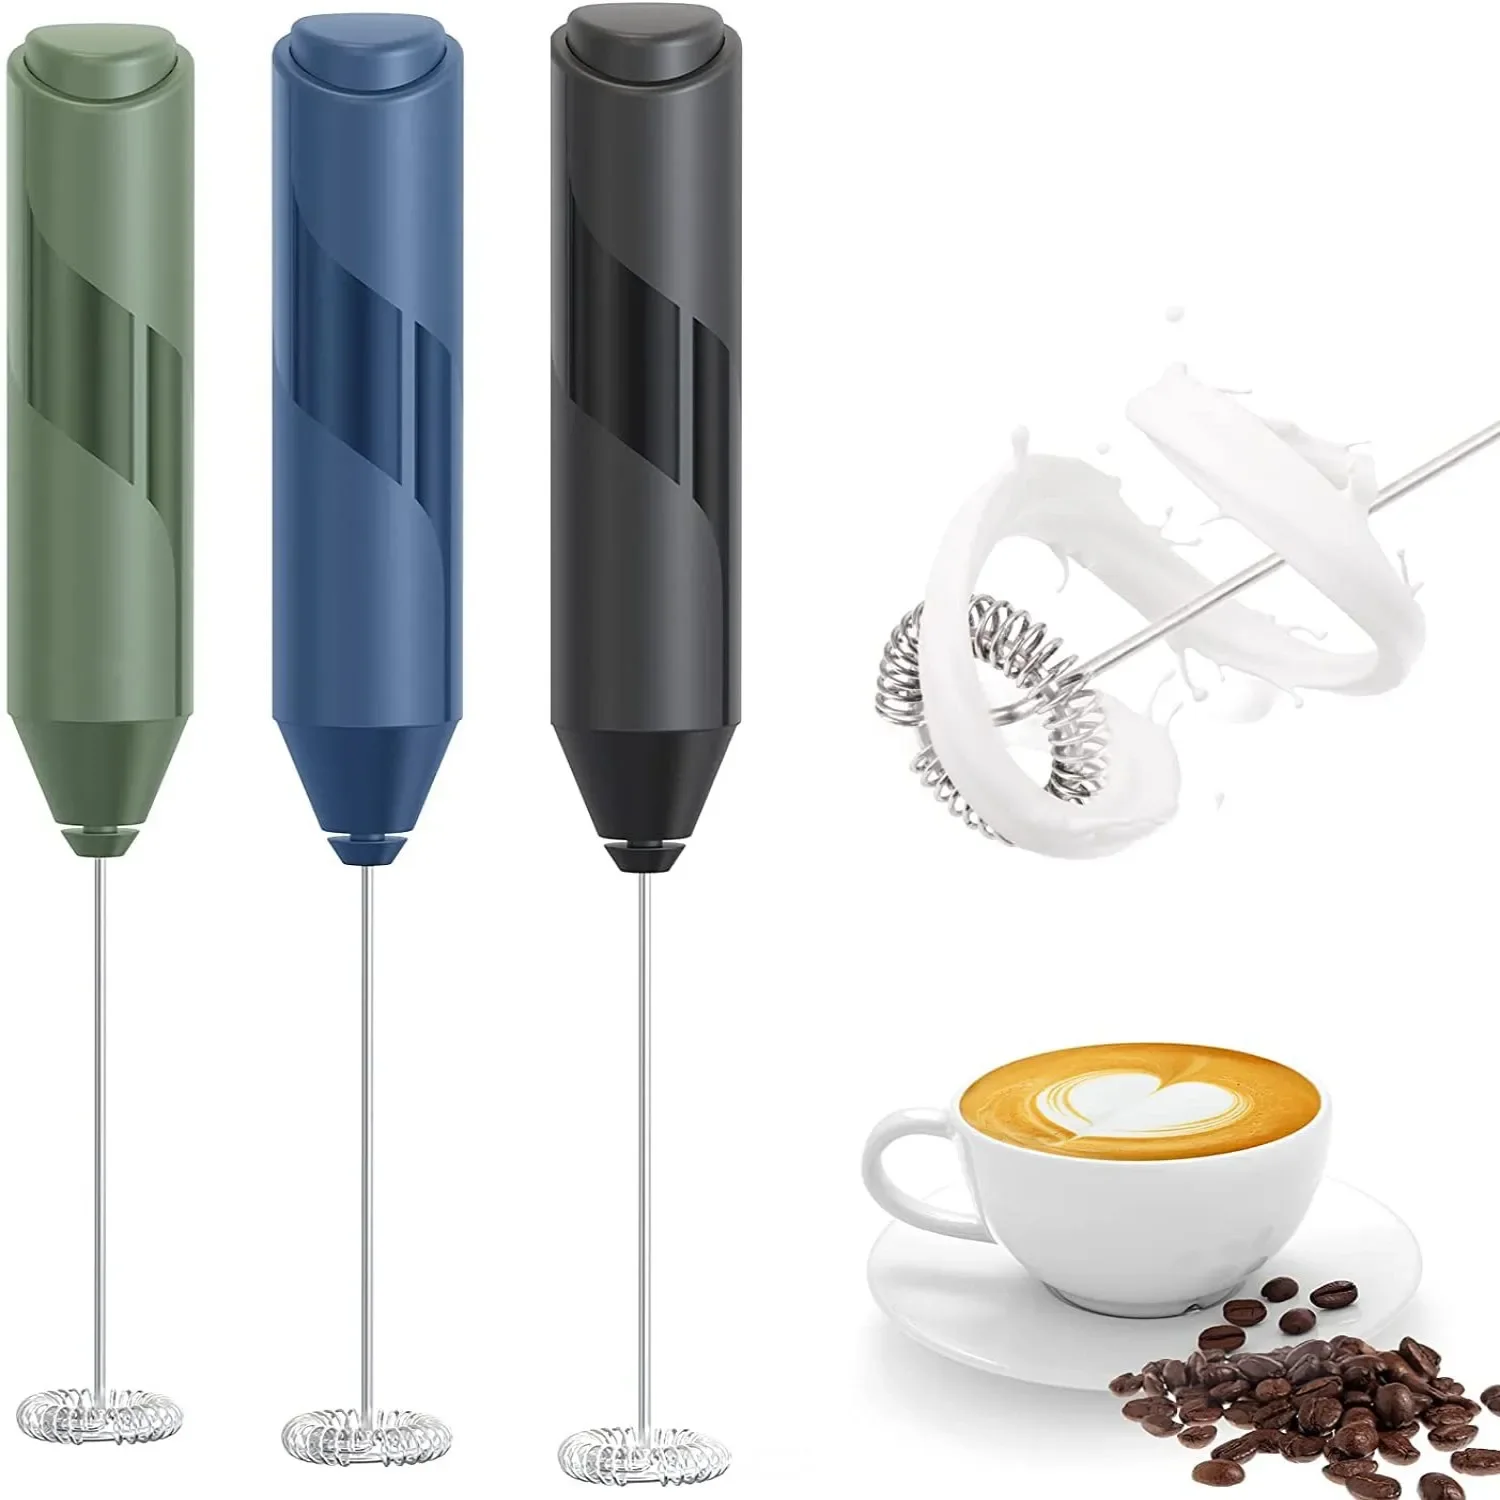  Double Whisk Milk Frother, Handheld Electric Blender stick,  Drink Mixer with Food Grade Stainless Steel Stirrer, Battery Operated Foam  Maker for Coffee, Cappuccino, Frappe, Matcha, Hot Chocolate Latte: Home &  Kitchen